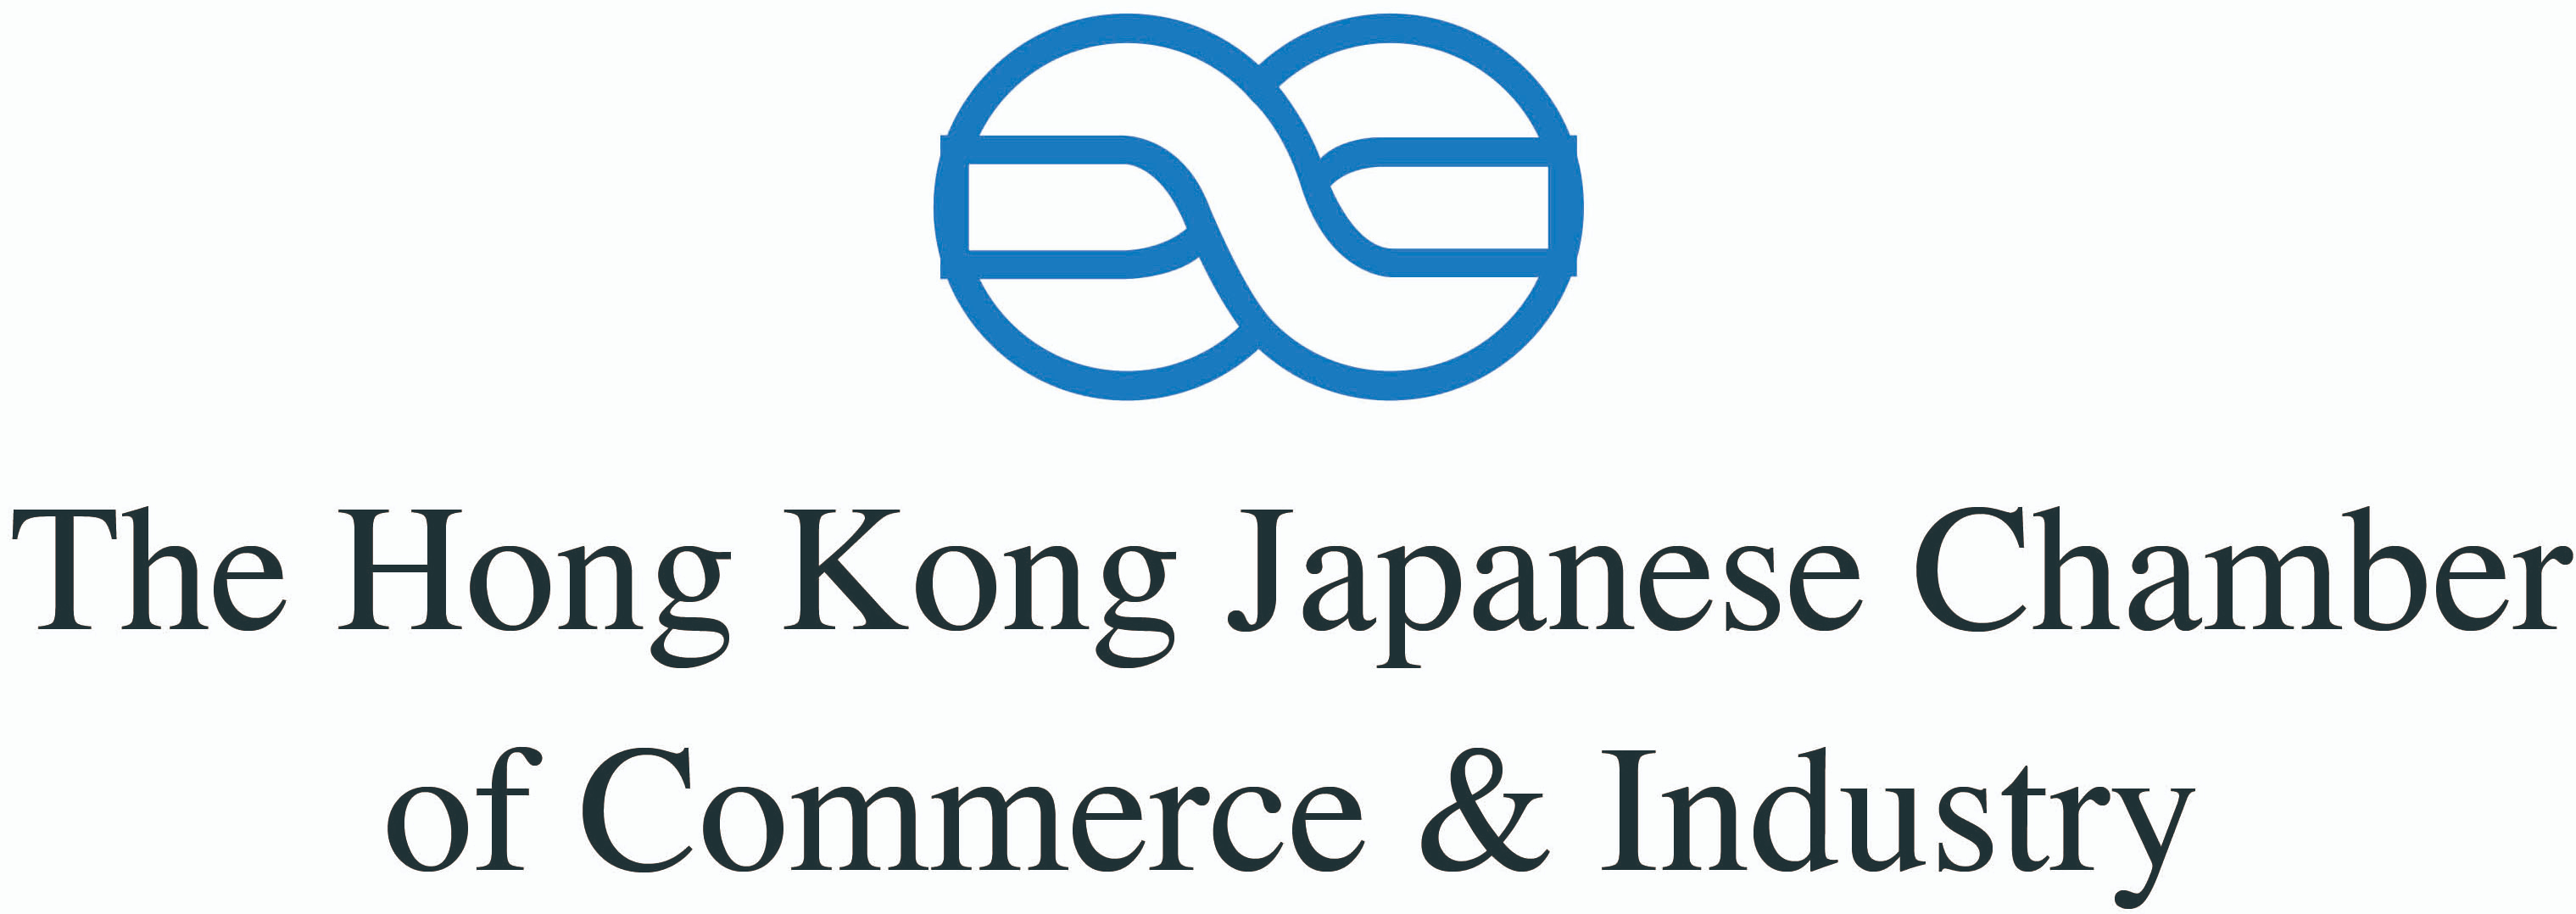 Hong Kong Japanese Chamber of Commerce and Industry